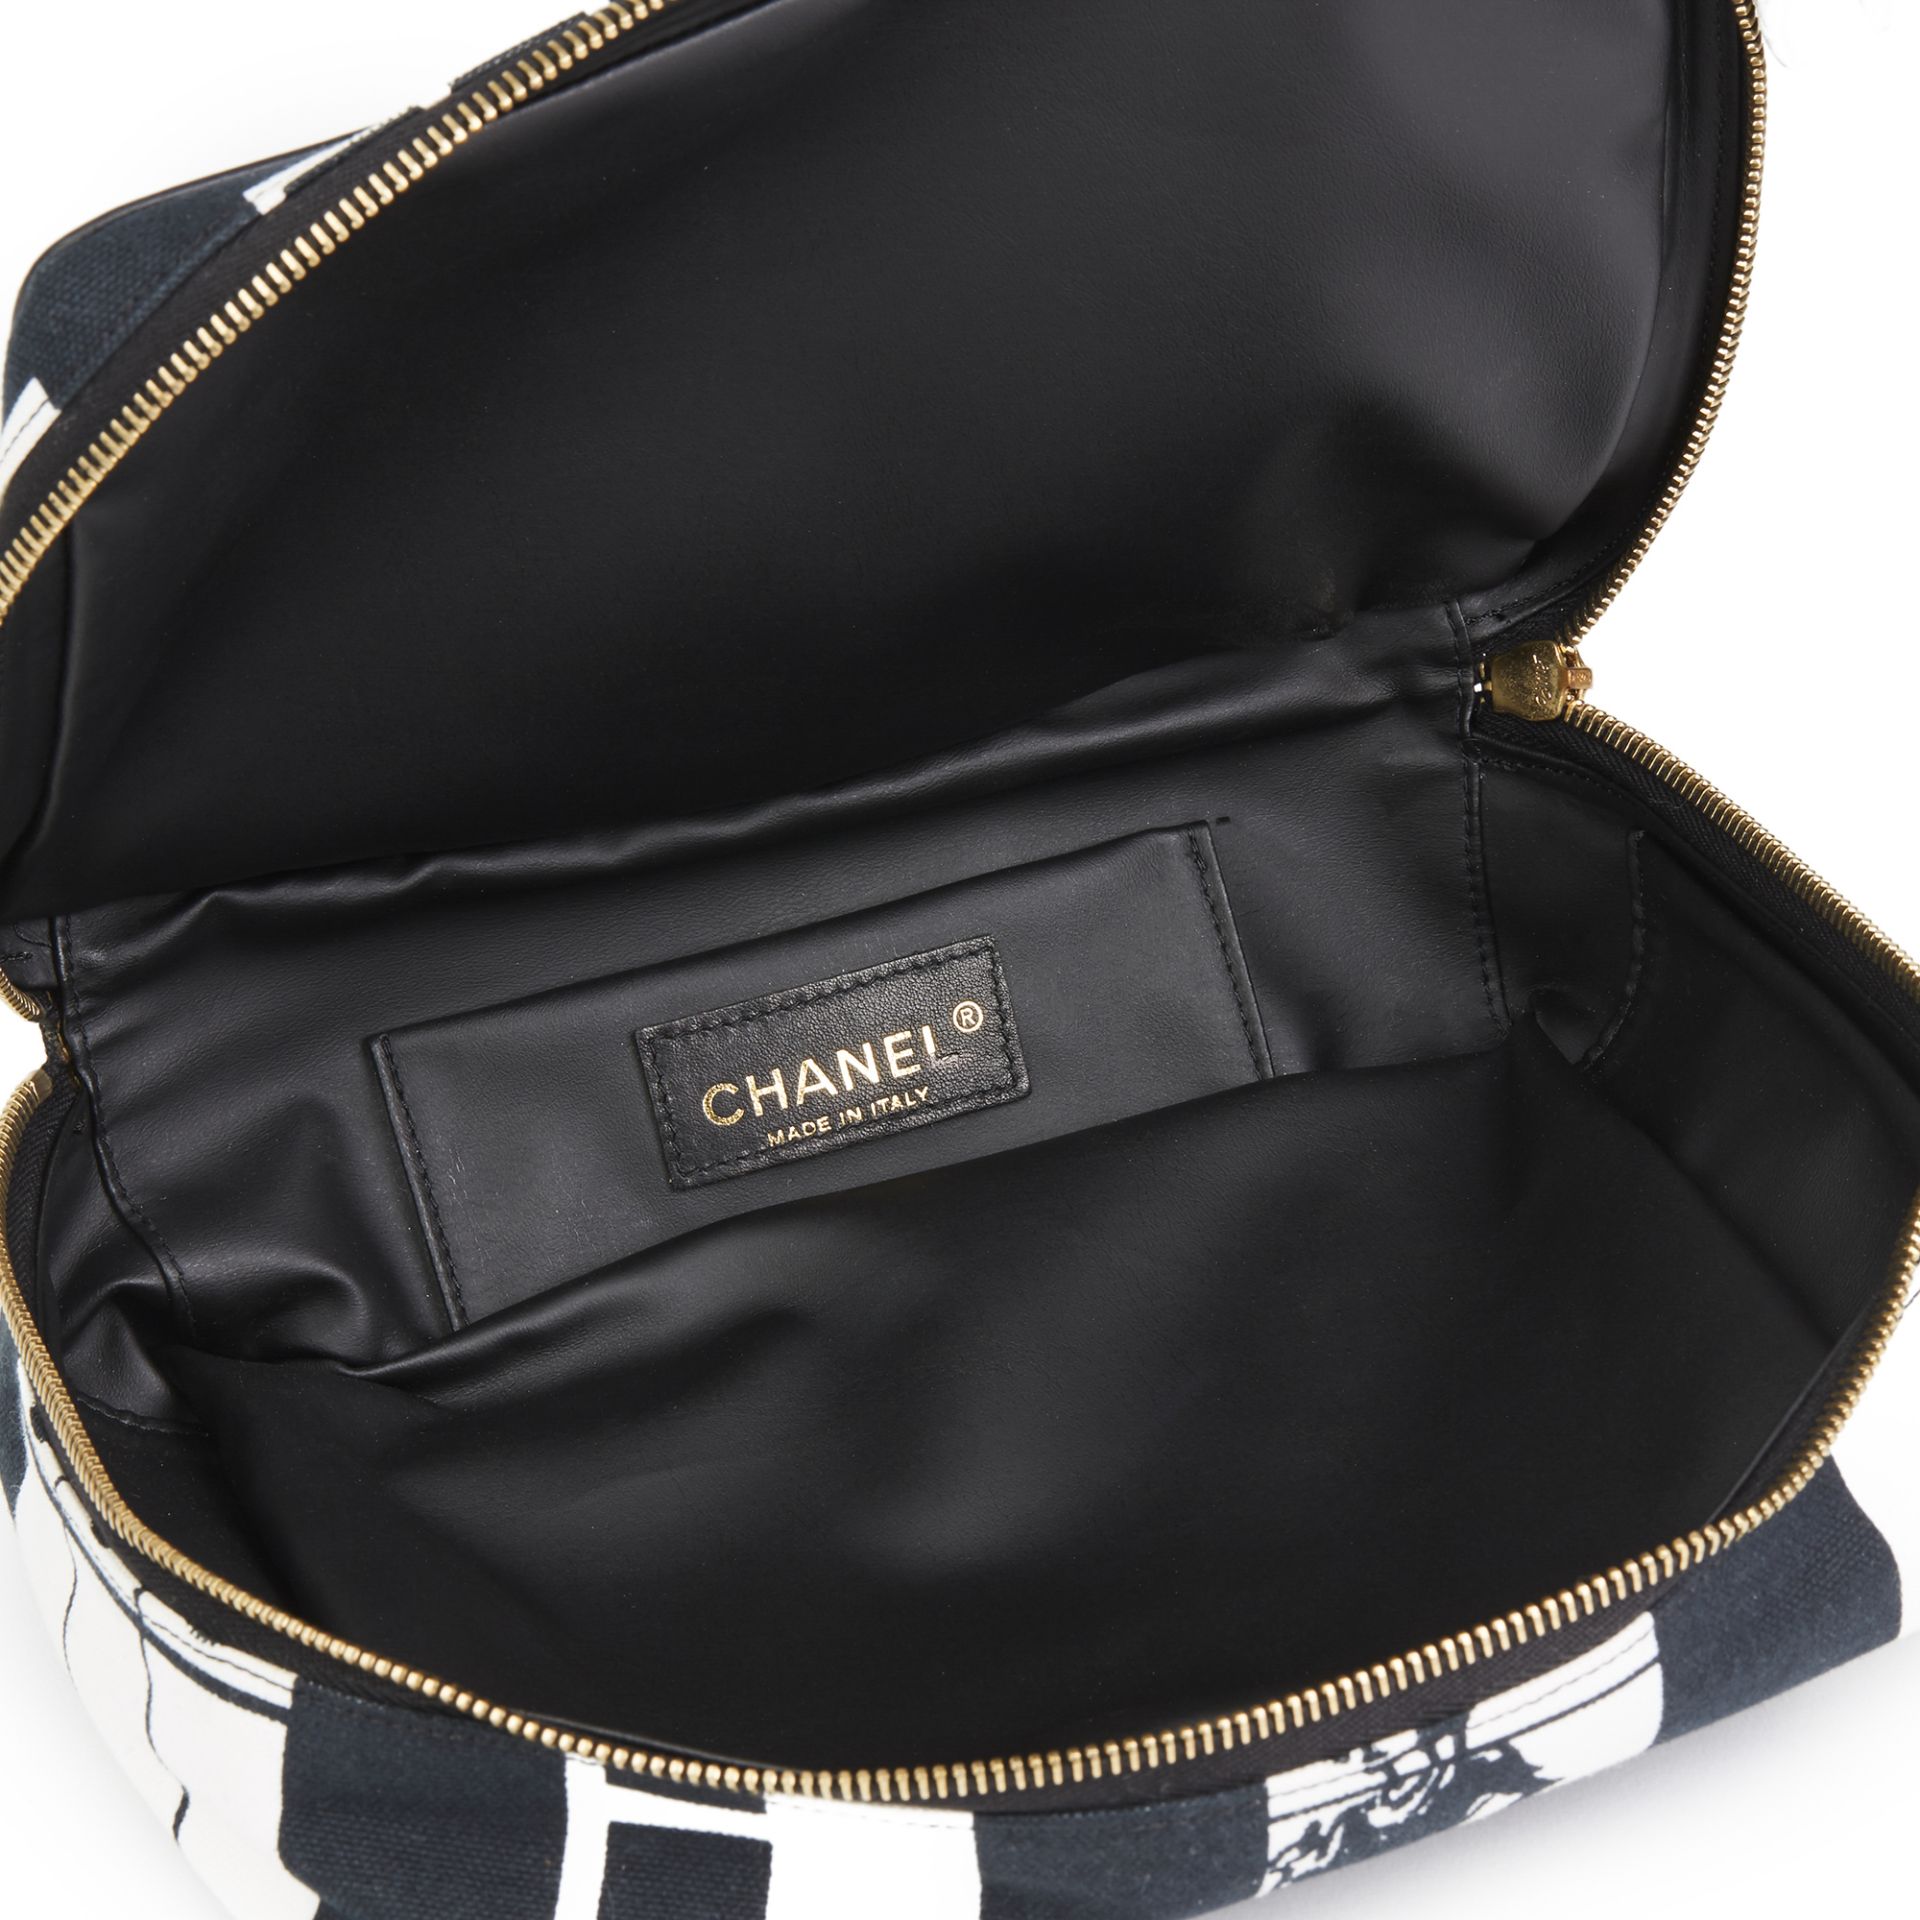 Chanel Toiletry Pouch - Image 3 of 9